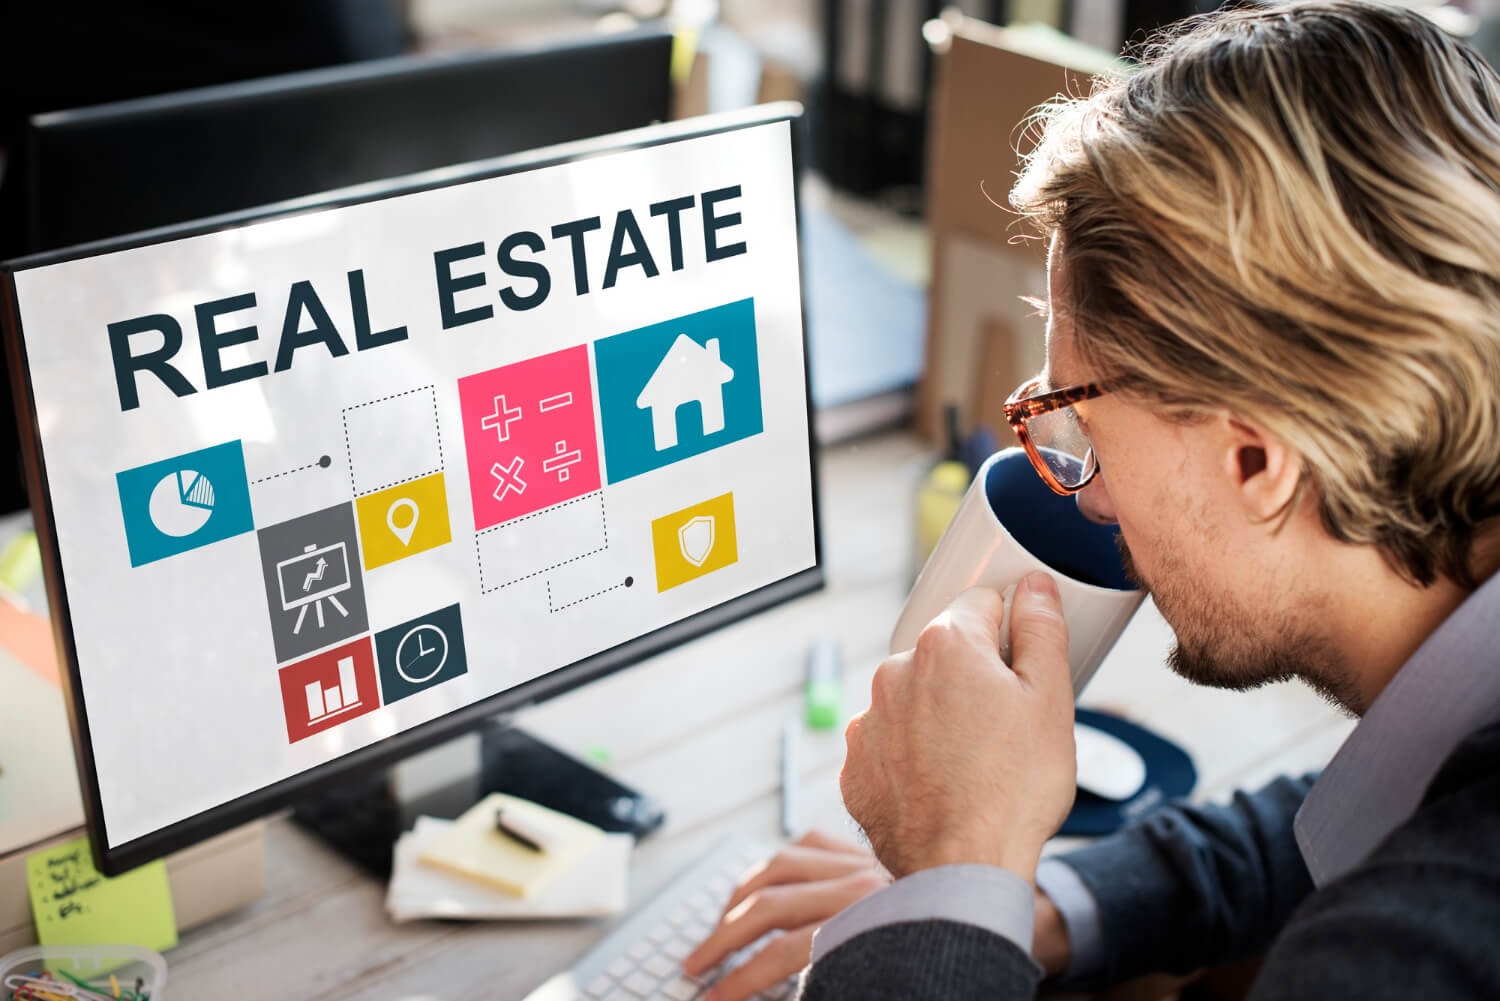 A virtual assistant working with a renowned real estate firm in the United States pays careful attention to provide a real estate marketing service that meets her firm's real estate KPI so that sales could find an increase, bringing greater business success.